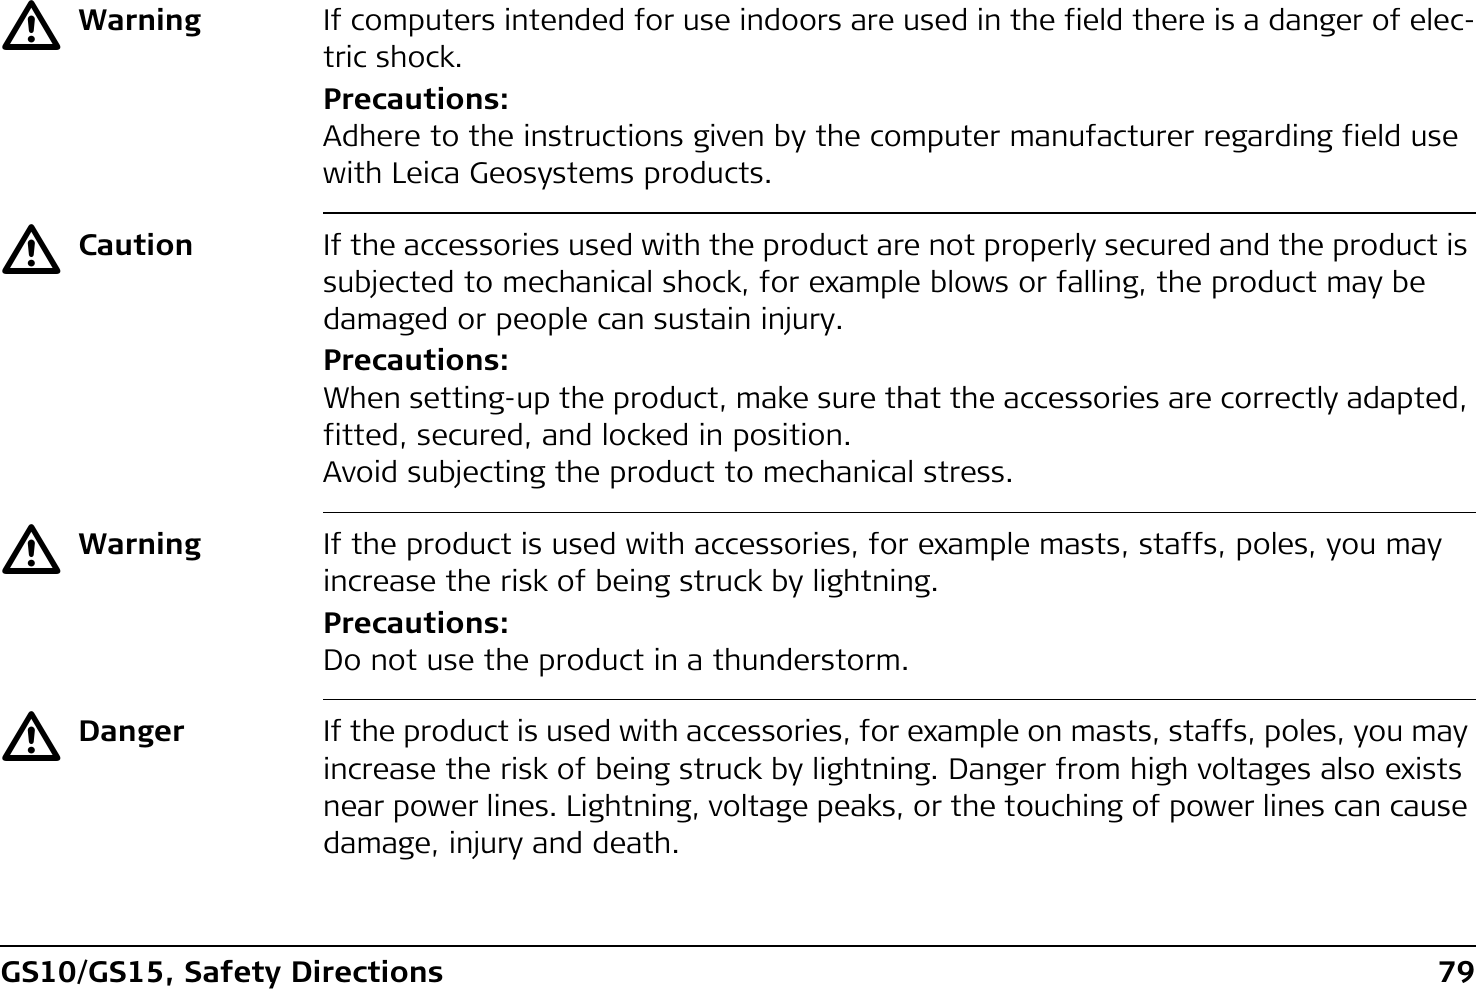 GS10/GS15, Safety Directions 79ƽWarning If computers intended for use indoors are used in the field there is a danger of elec-tric shock.Precautions:Adhere to the instructions given by the computer manufacturer regarding field use with Leica Geosystems products.ƽCaution If the accessories used with the product are not properly secured and the product is subjected to mechanical shock, for example blows or falling, the product may be damaged or people can sustain injury.Precautions:When setting-up the product, make sure that the accessories are correctly adapted, fitted, secured, and locked in position.Avoid subjecting the product to mechanical stress.ƽWarning If the product is used with accessories, for example masts, staffs, poles, you may increase the risk of being struck by lightning.Precautions:Do not use the product in a thunderstorm.ƽDanger If the product is used with accessories, for example on masts, staffs, poles, you may increase the risk of being struck by lightning. Danger from high voltages also exists near power lines. Lightning, voltage peaks, or the touching of power lines can cause damage, injury and death.